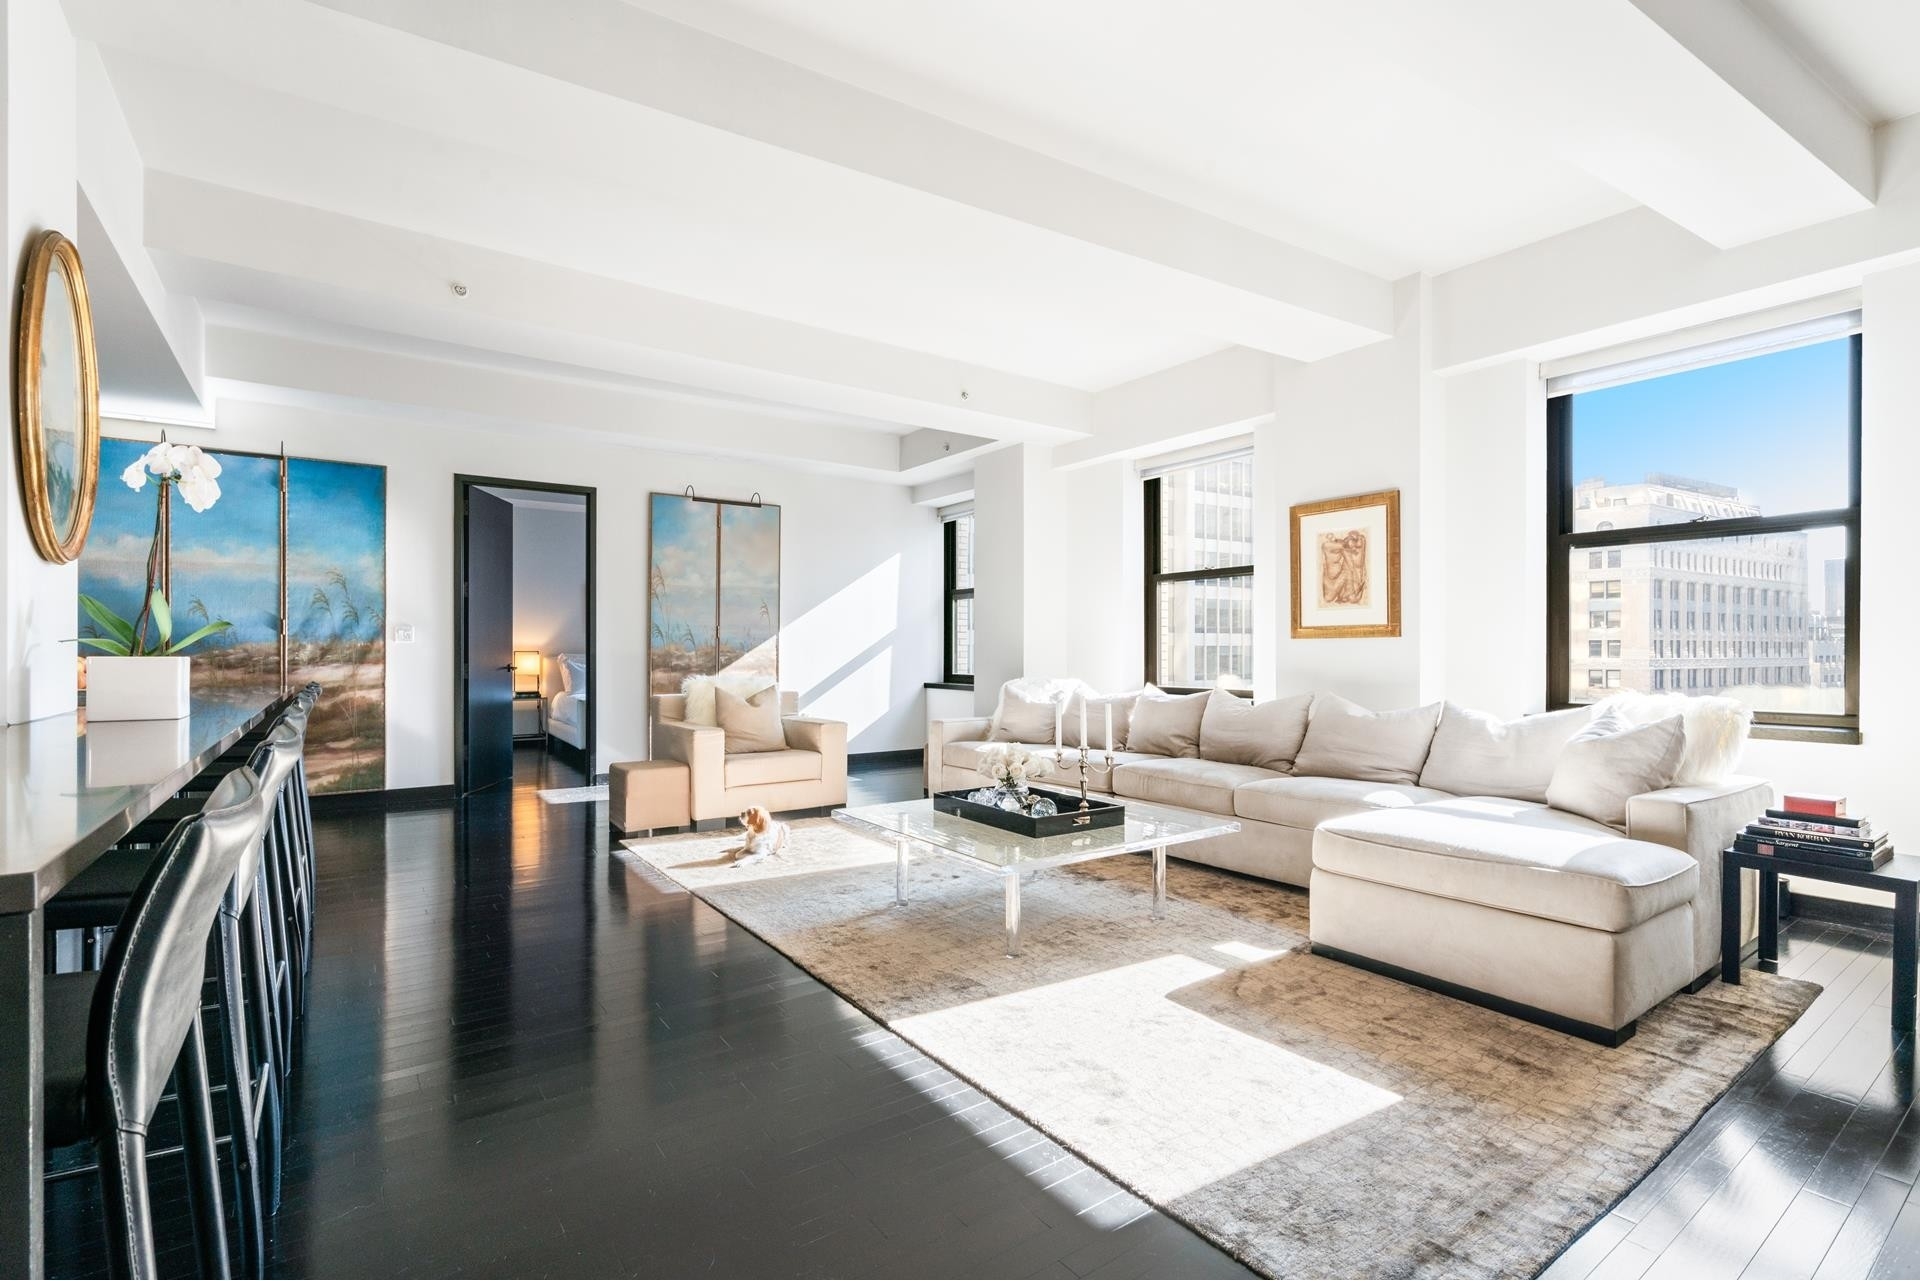 Property at The Collection, 20 PINE ST, 2101 Financial District, New York, NY 10005